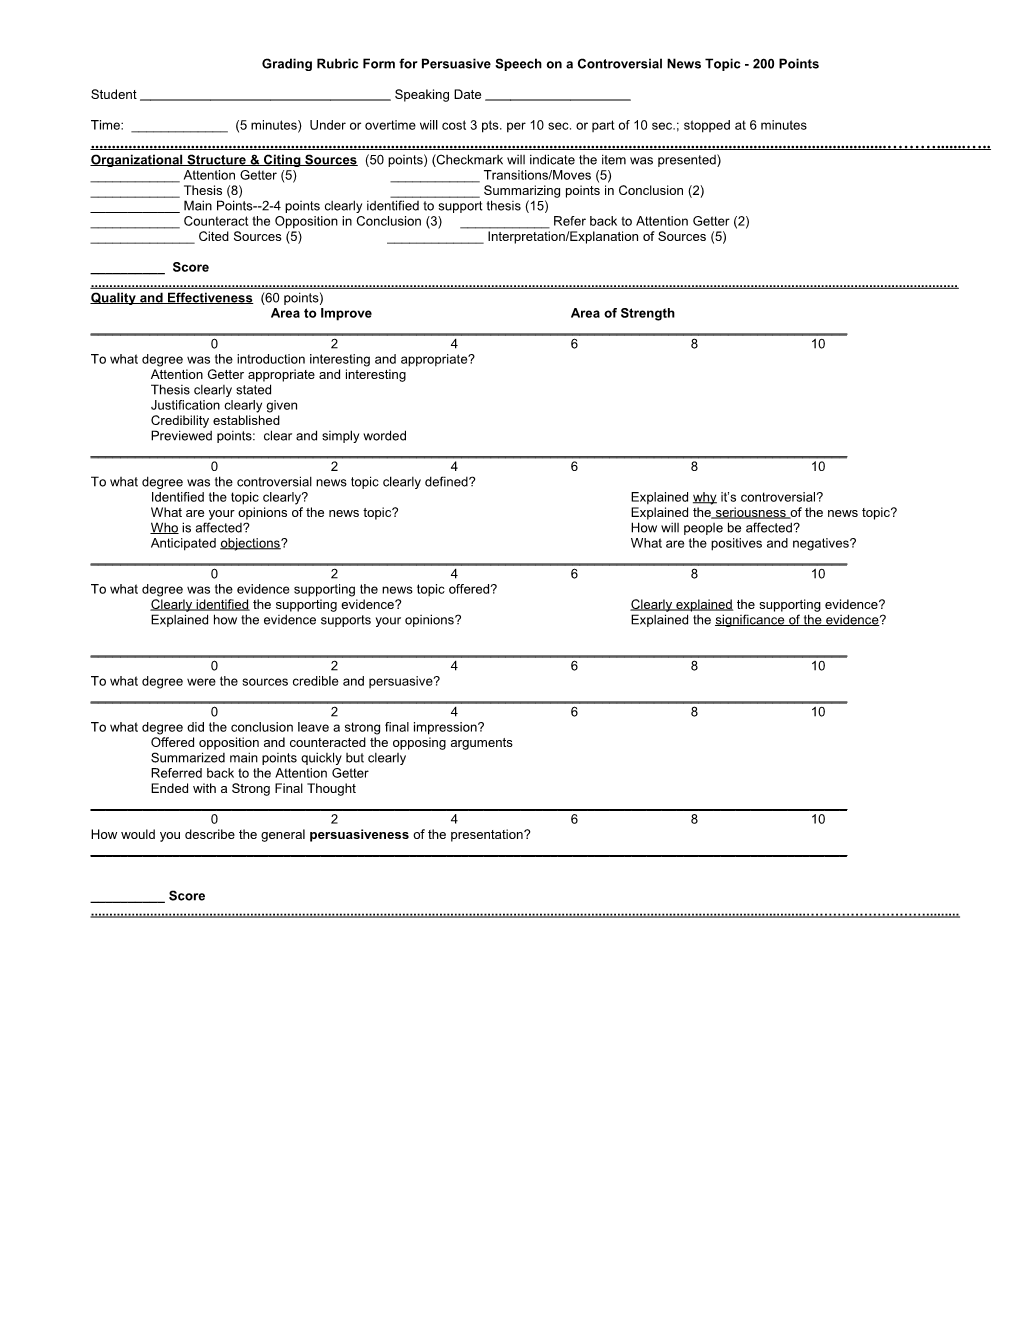 Applied Speech - Evaluation Form for Controversial Educational Issue Presentation - 100 Points